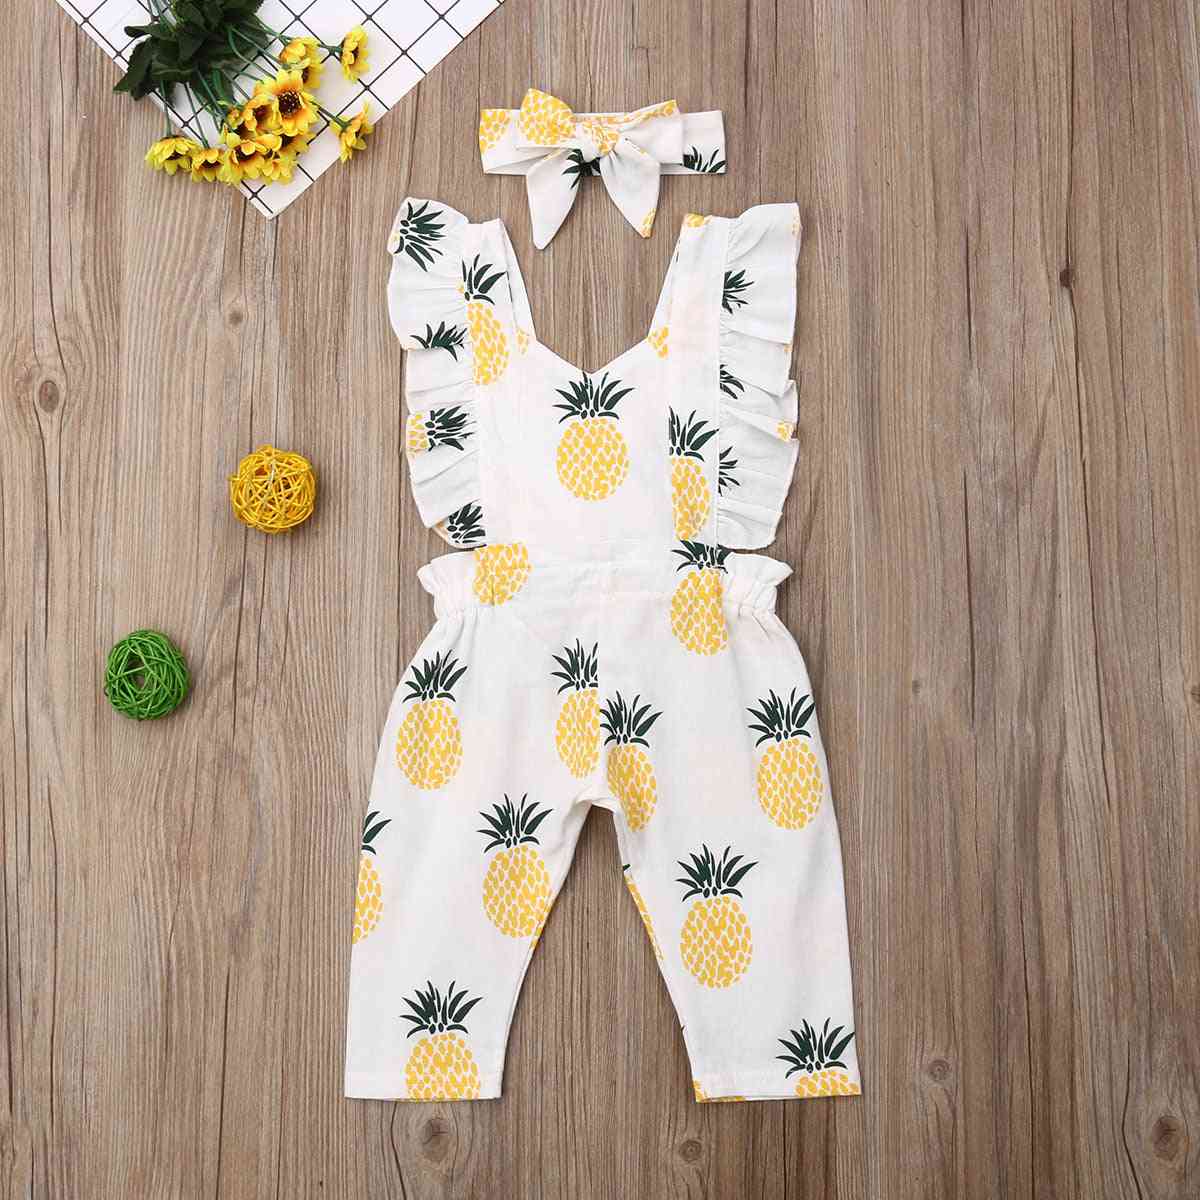 Newborn Baby Girl Clothes Sleevless Ruffle Pineapple Print Romper Jumpsuit Headband Outfits Summer Clothes